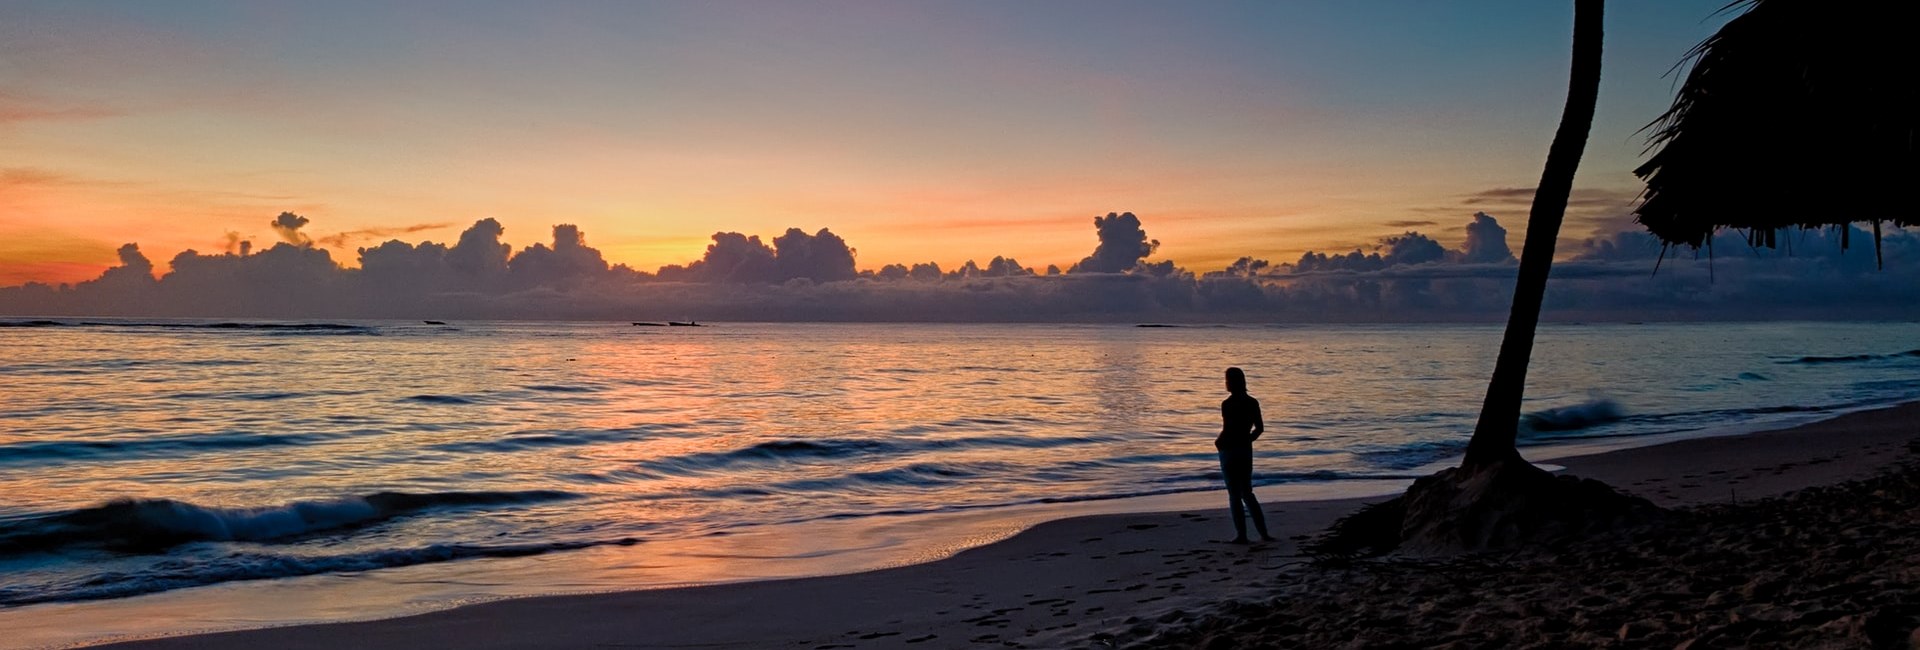 Person standing on a tropical beach watching the sunset in Punta Cana